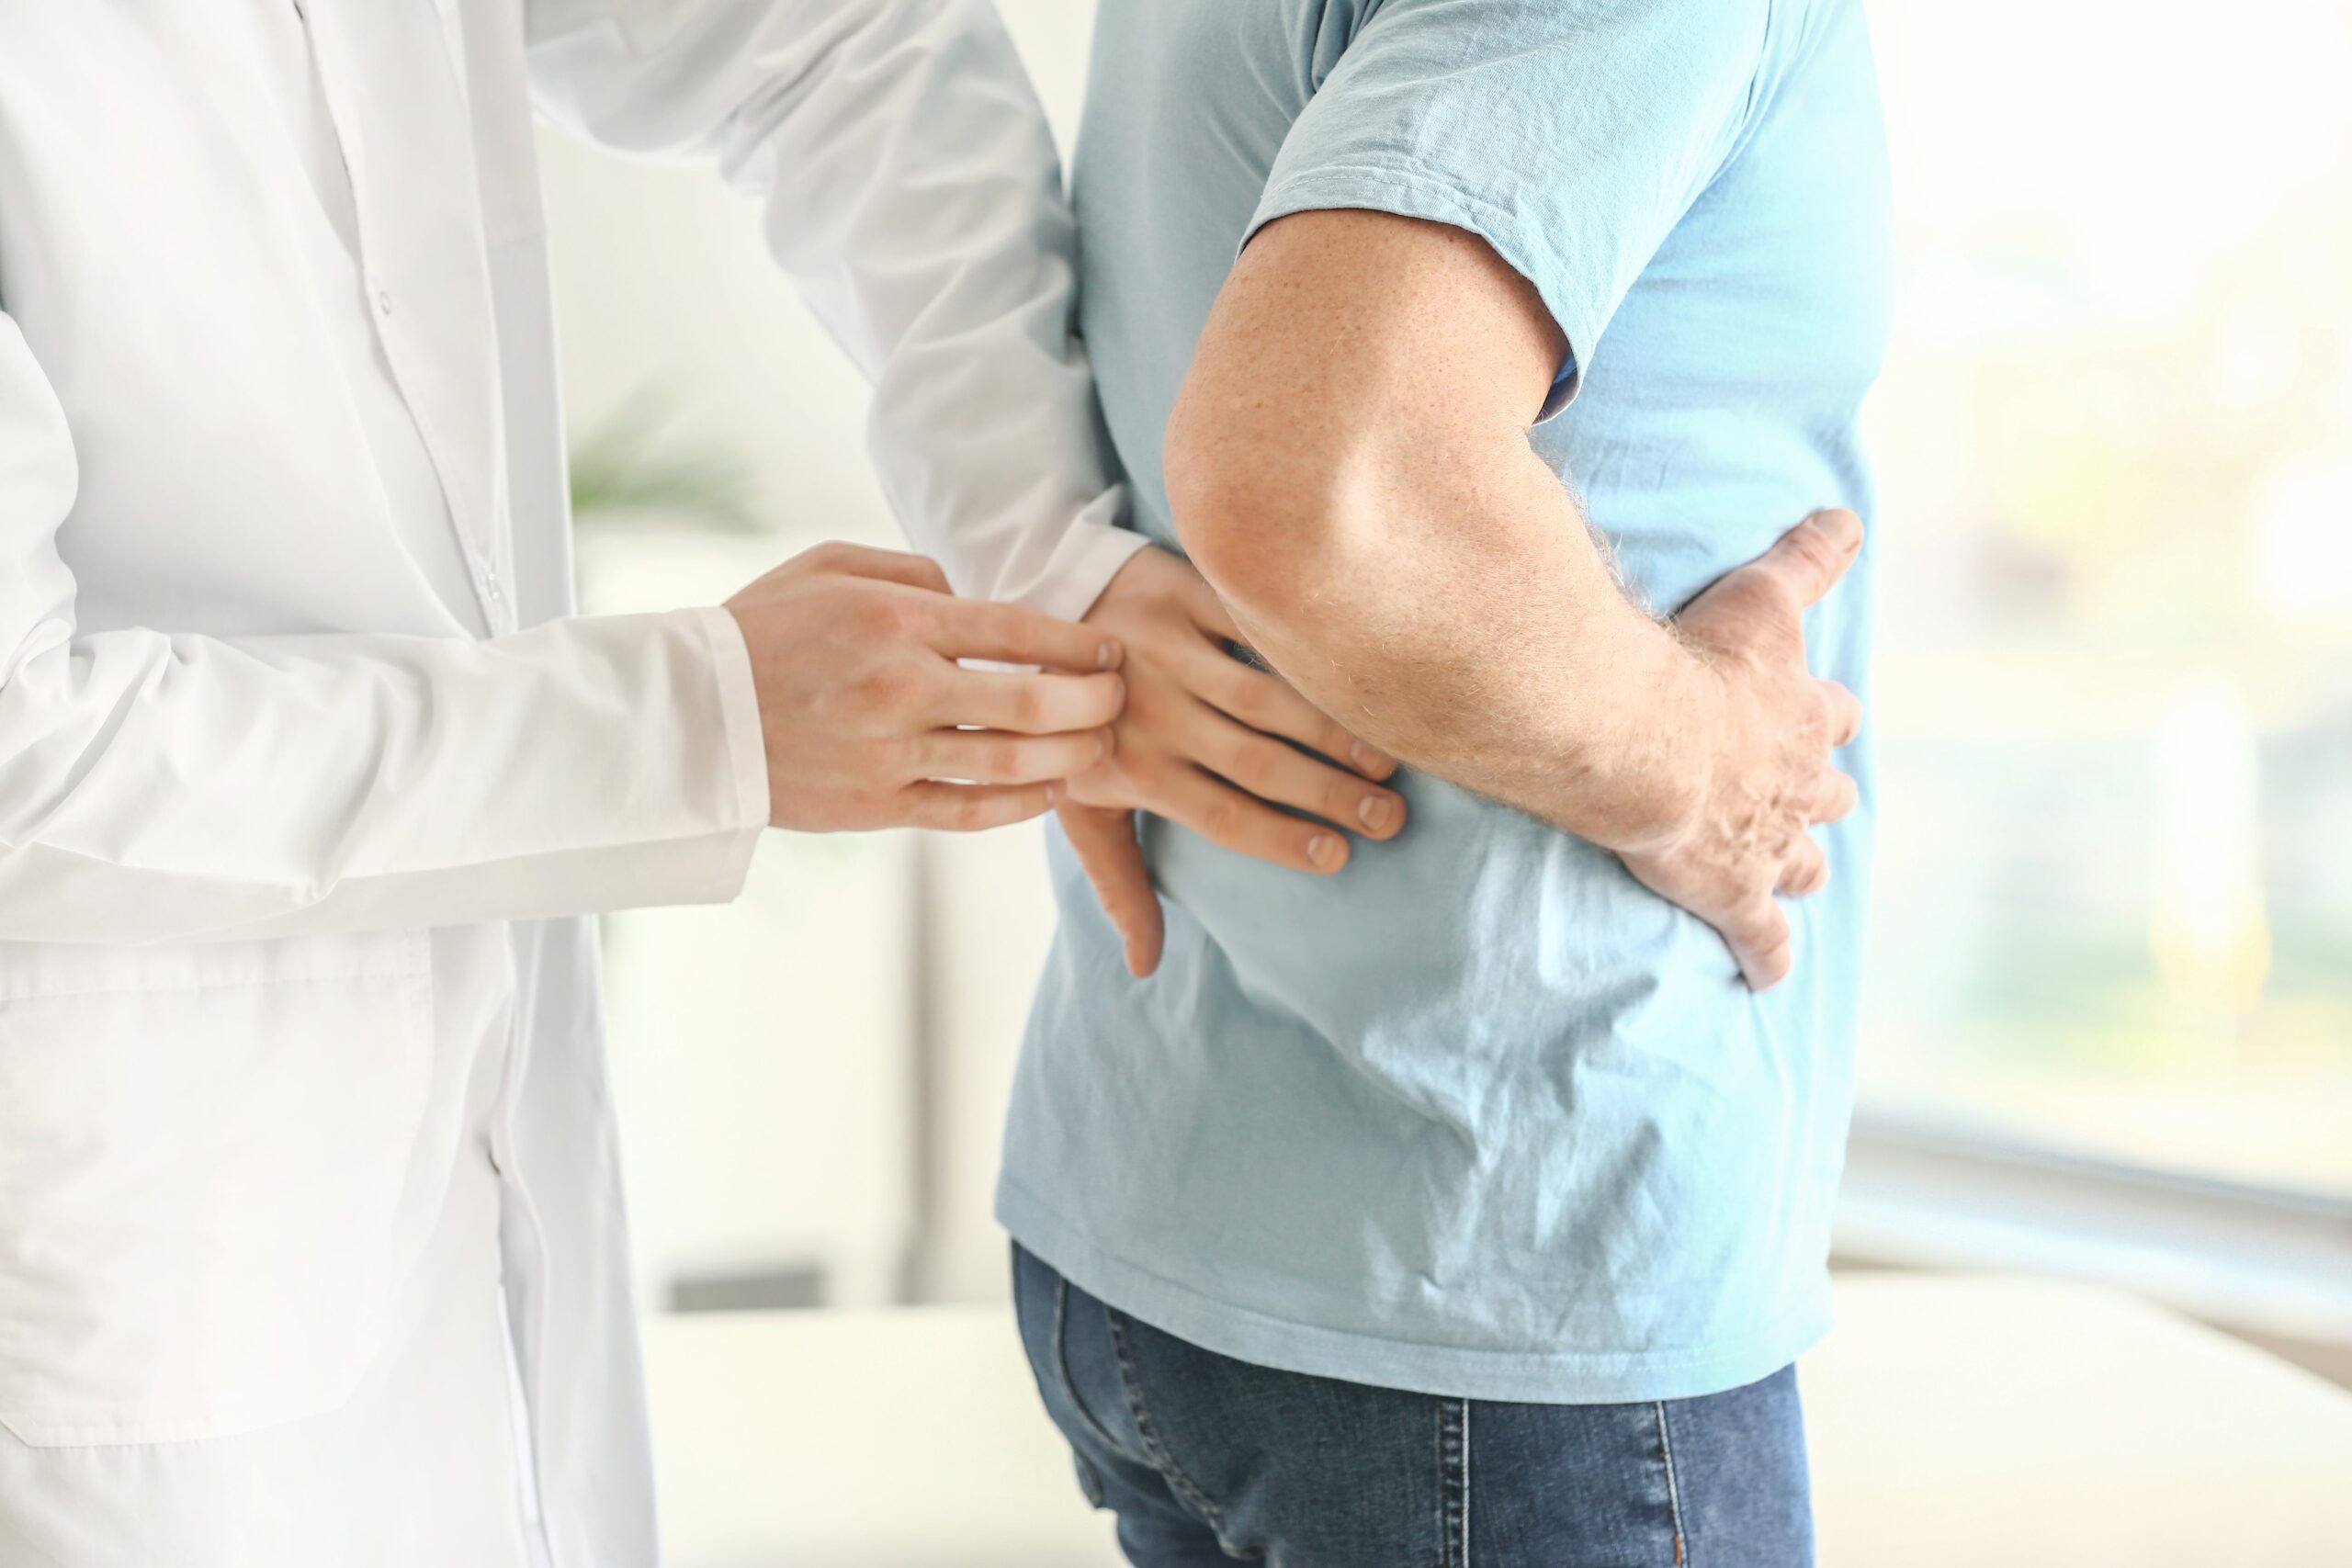 urologist examining patient back due to kidney stone.